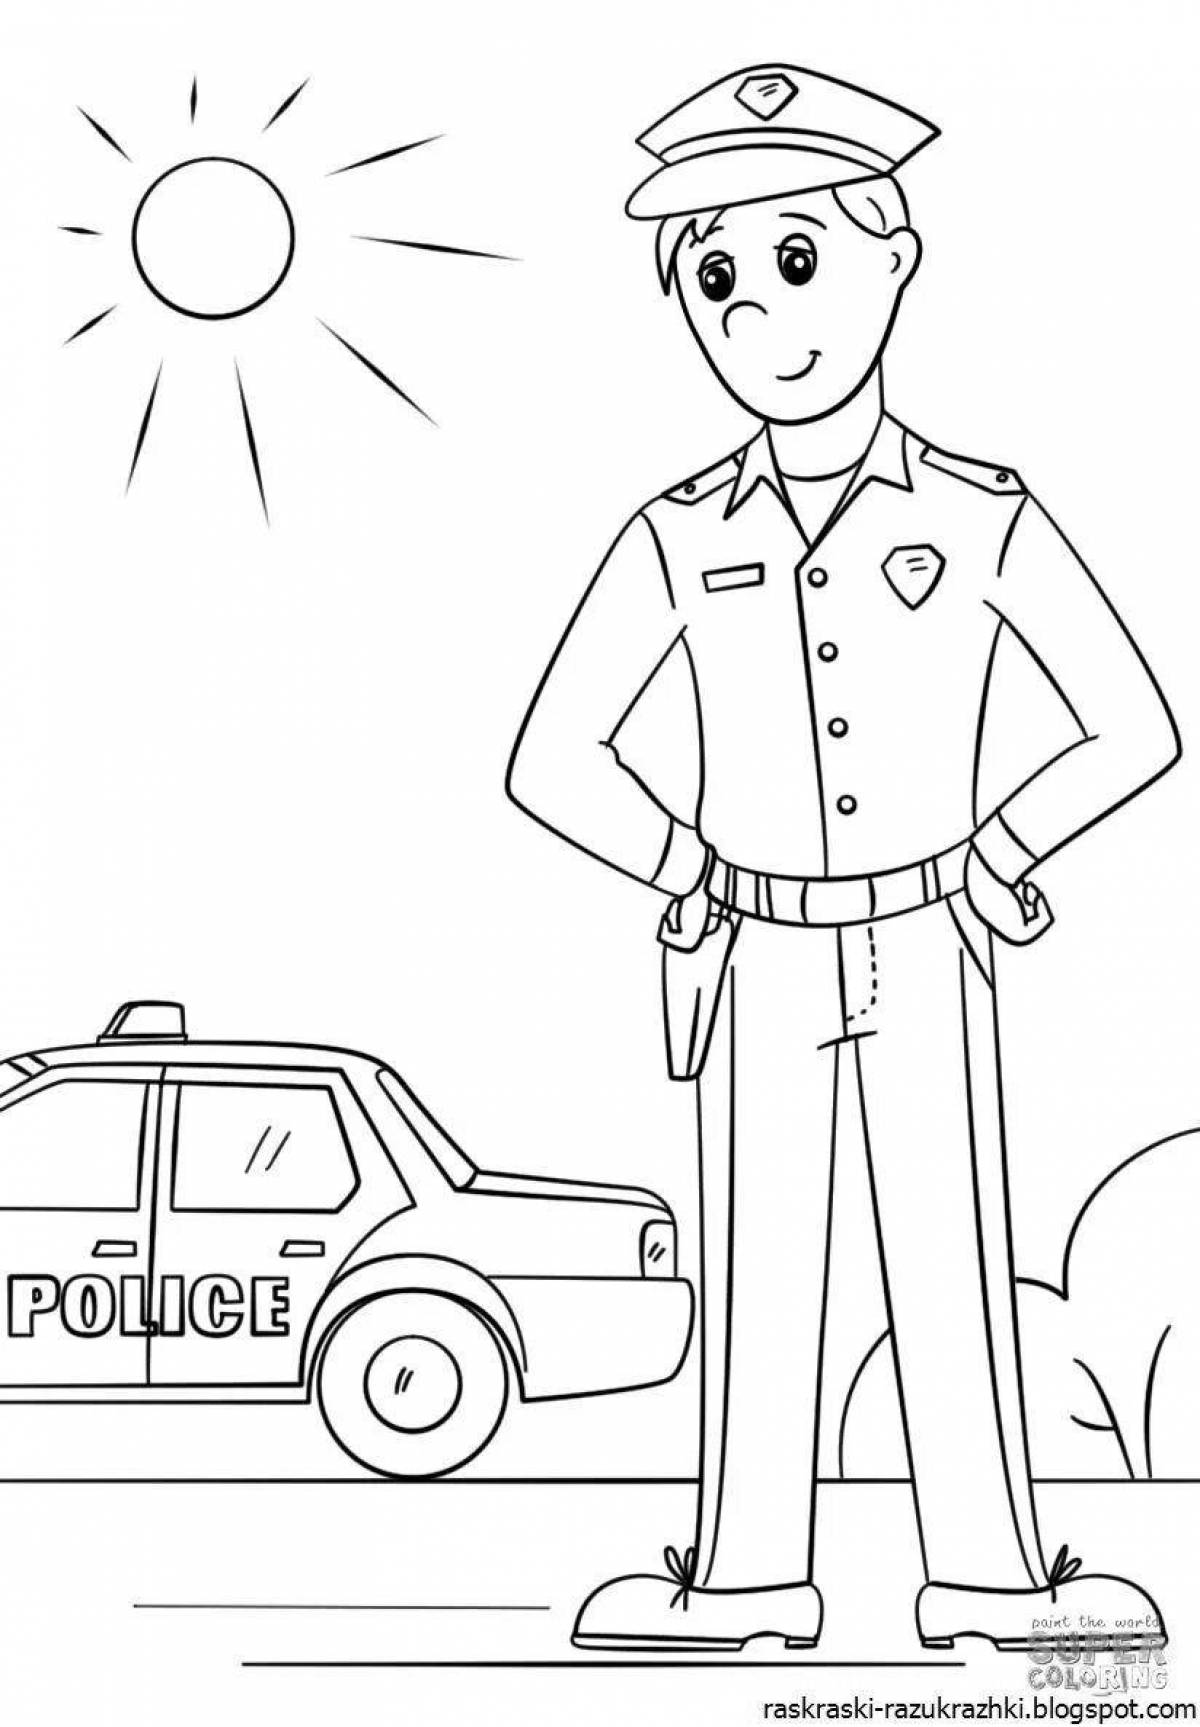 Gorgeous police coloring book for preschoolers